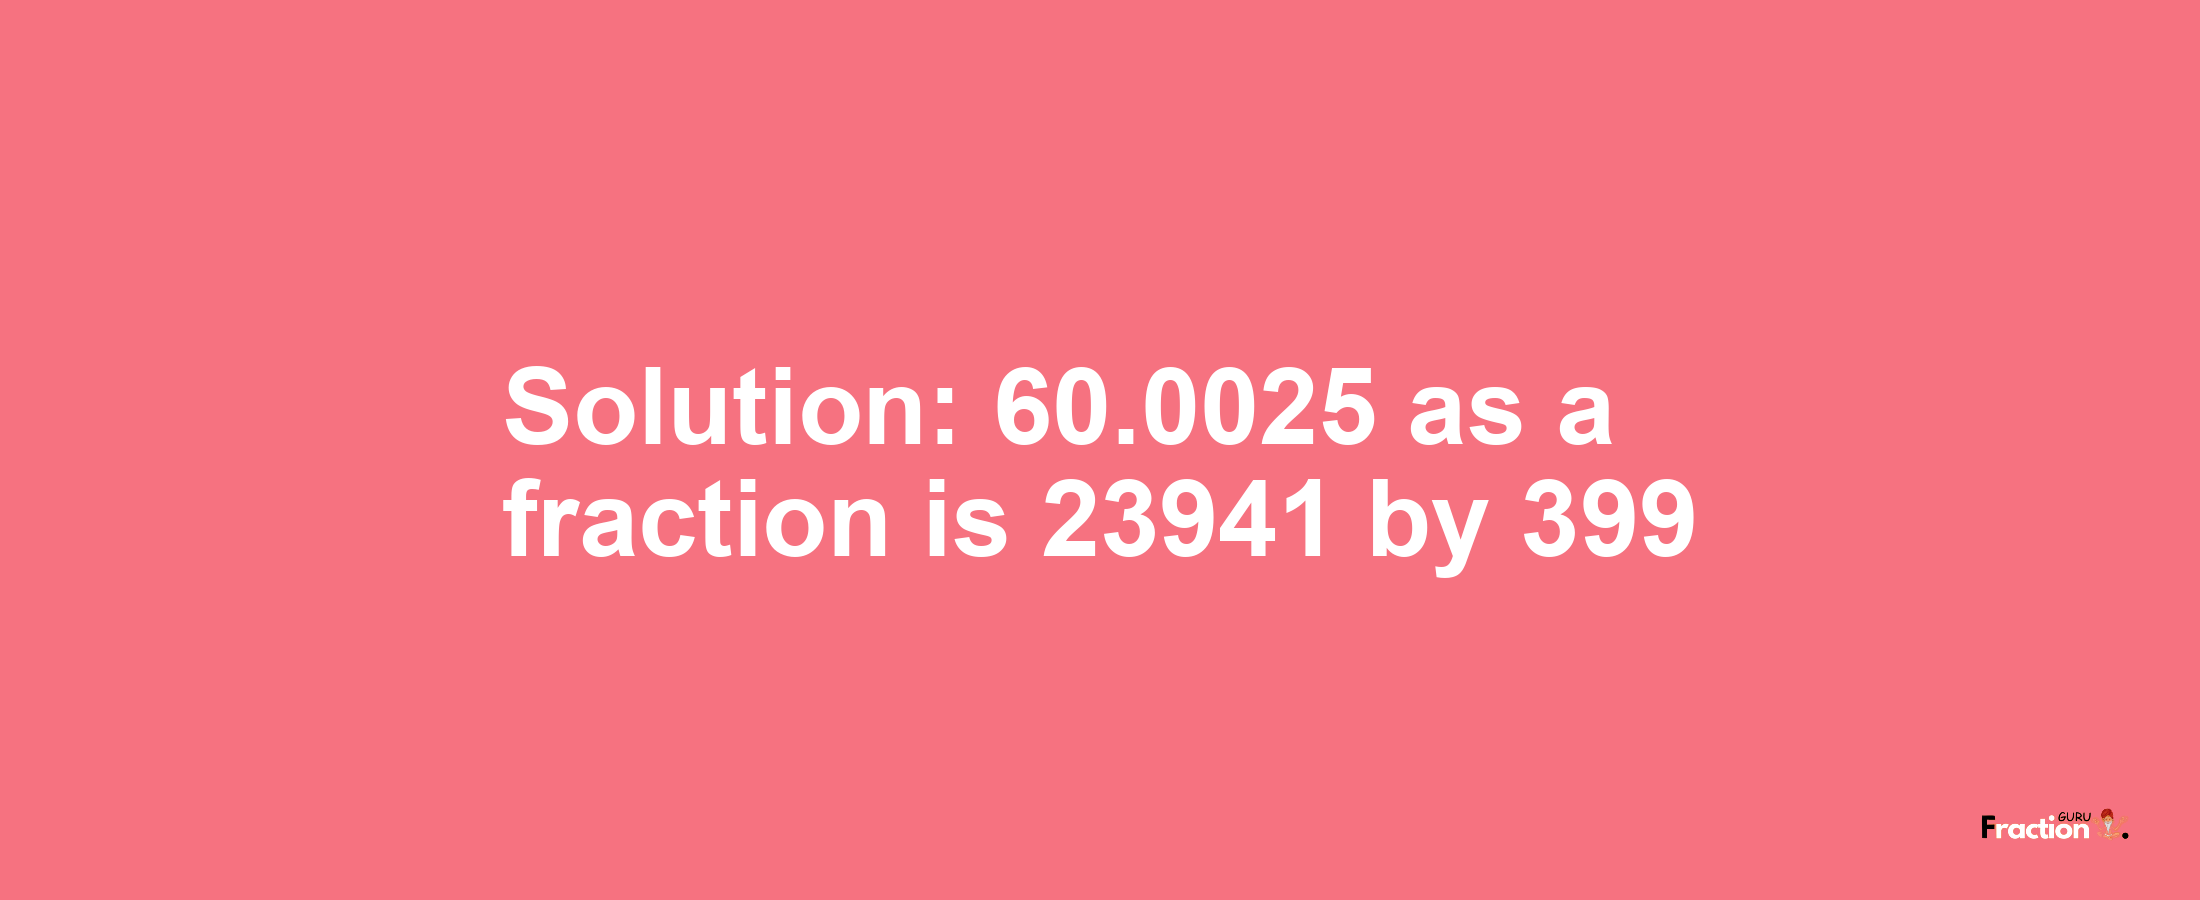 Solution:60.0025 as a fraction is 23941/399